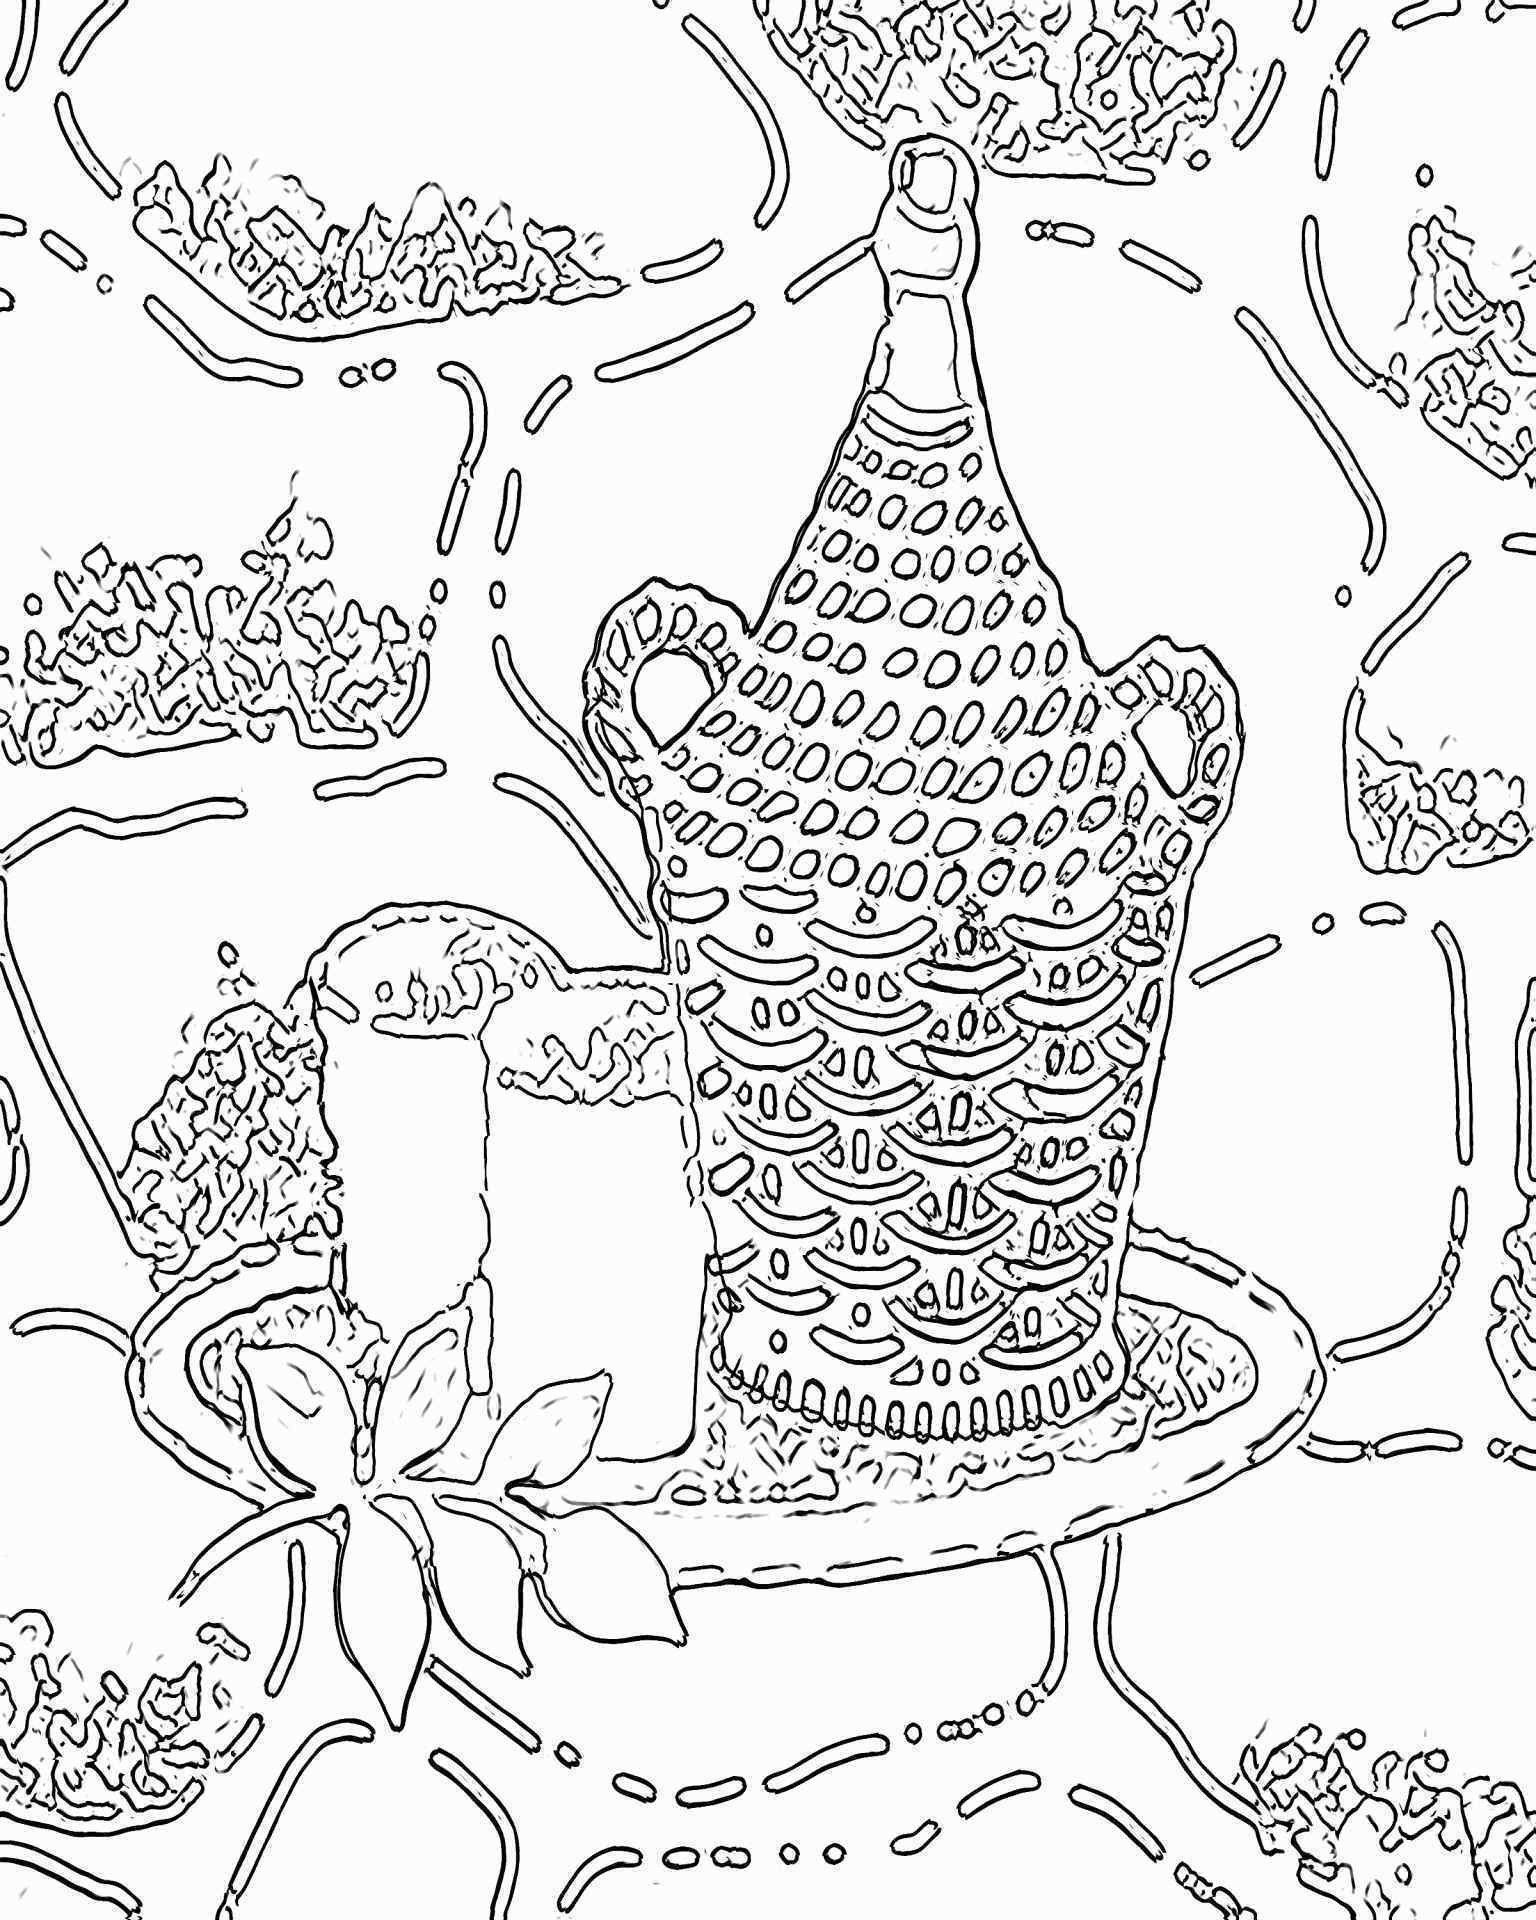 15 Famous Flowers In Vase 2024 free download flowers in vase of flower template for coloring beautiful cool vases flower vase regarding flower template for coloring beautiful cool vases flower vase coloring page pages flowers in a top 